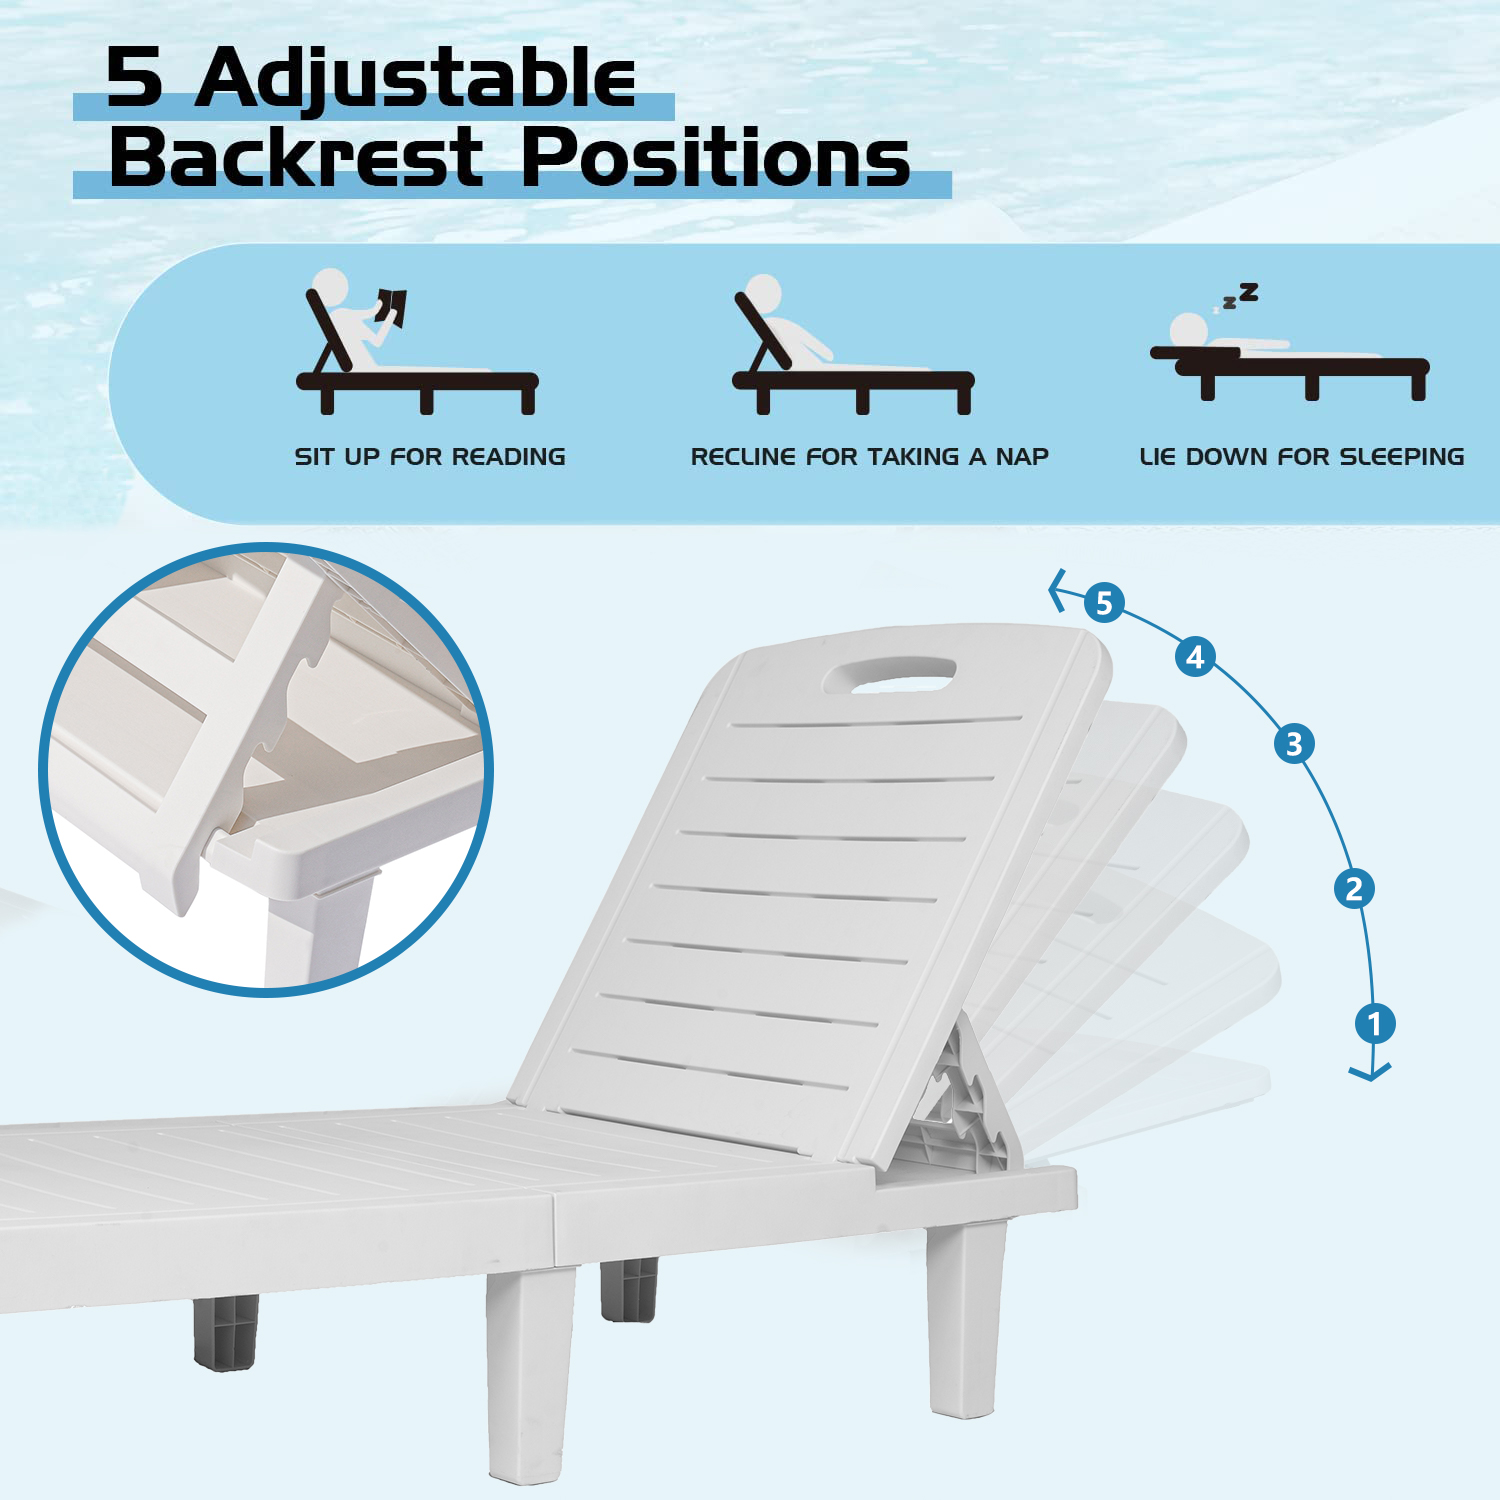 Outdoor Chaise Lounger, Single Patio Chaise Lounge Chair Furniture Set with Adjustable Back and Retractable Tray, All-Weather Plastic Reclining Lounge Chair for Beach, Backyard, Porch, Garden, Pool, L - image 2 of 9